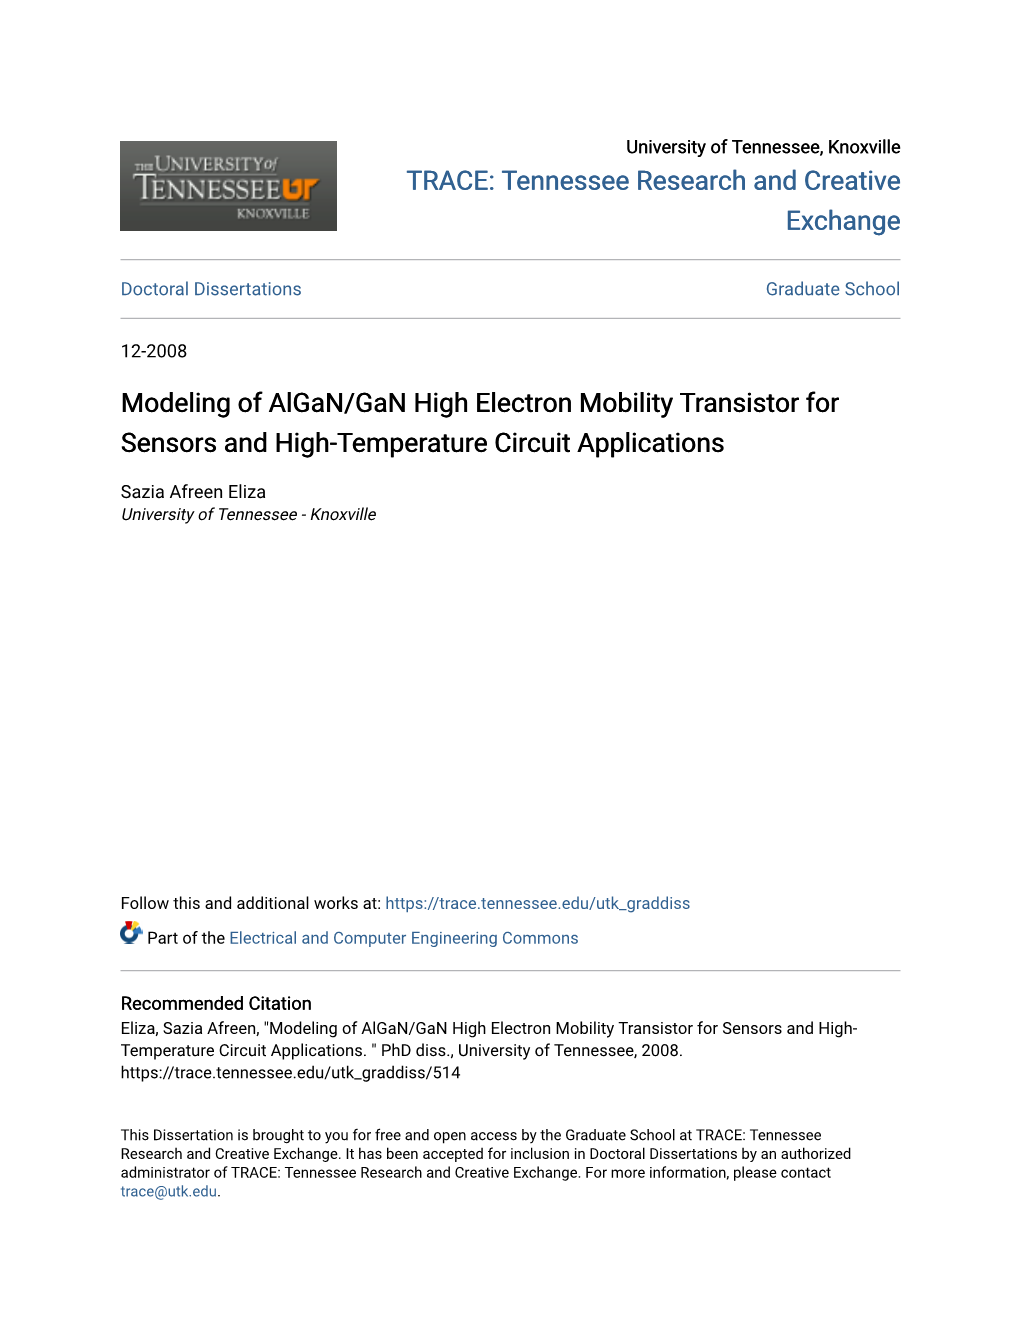 Modeling of Algan/Gan High Electron Mobility Transistor for Sensors and High-Temperature Circuit Applications